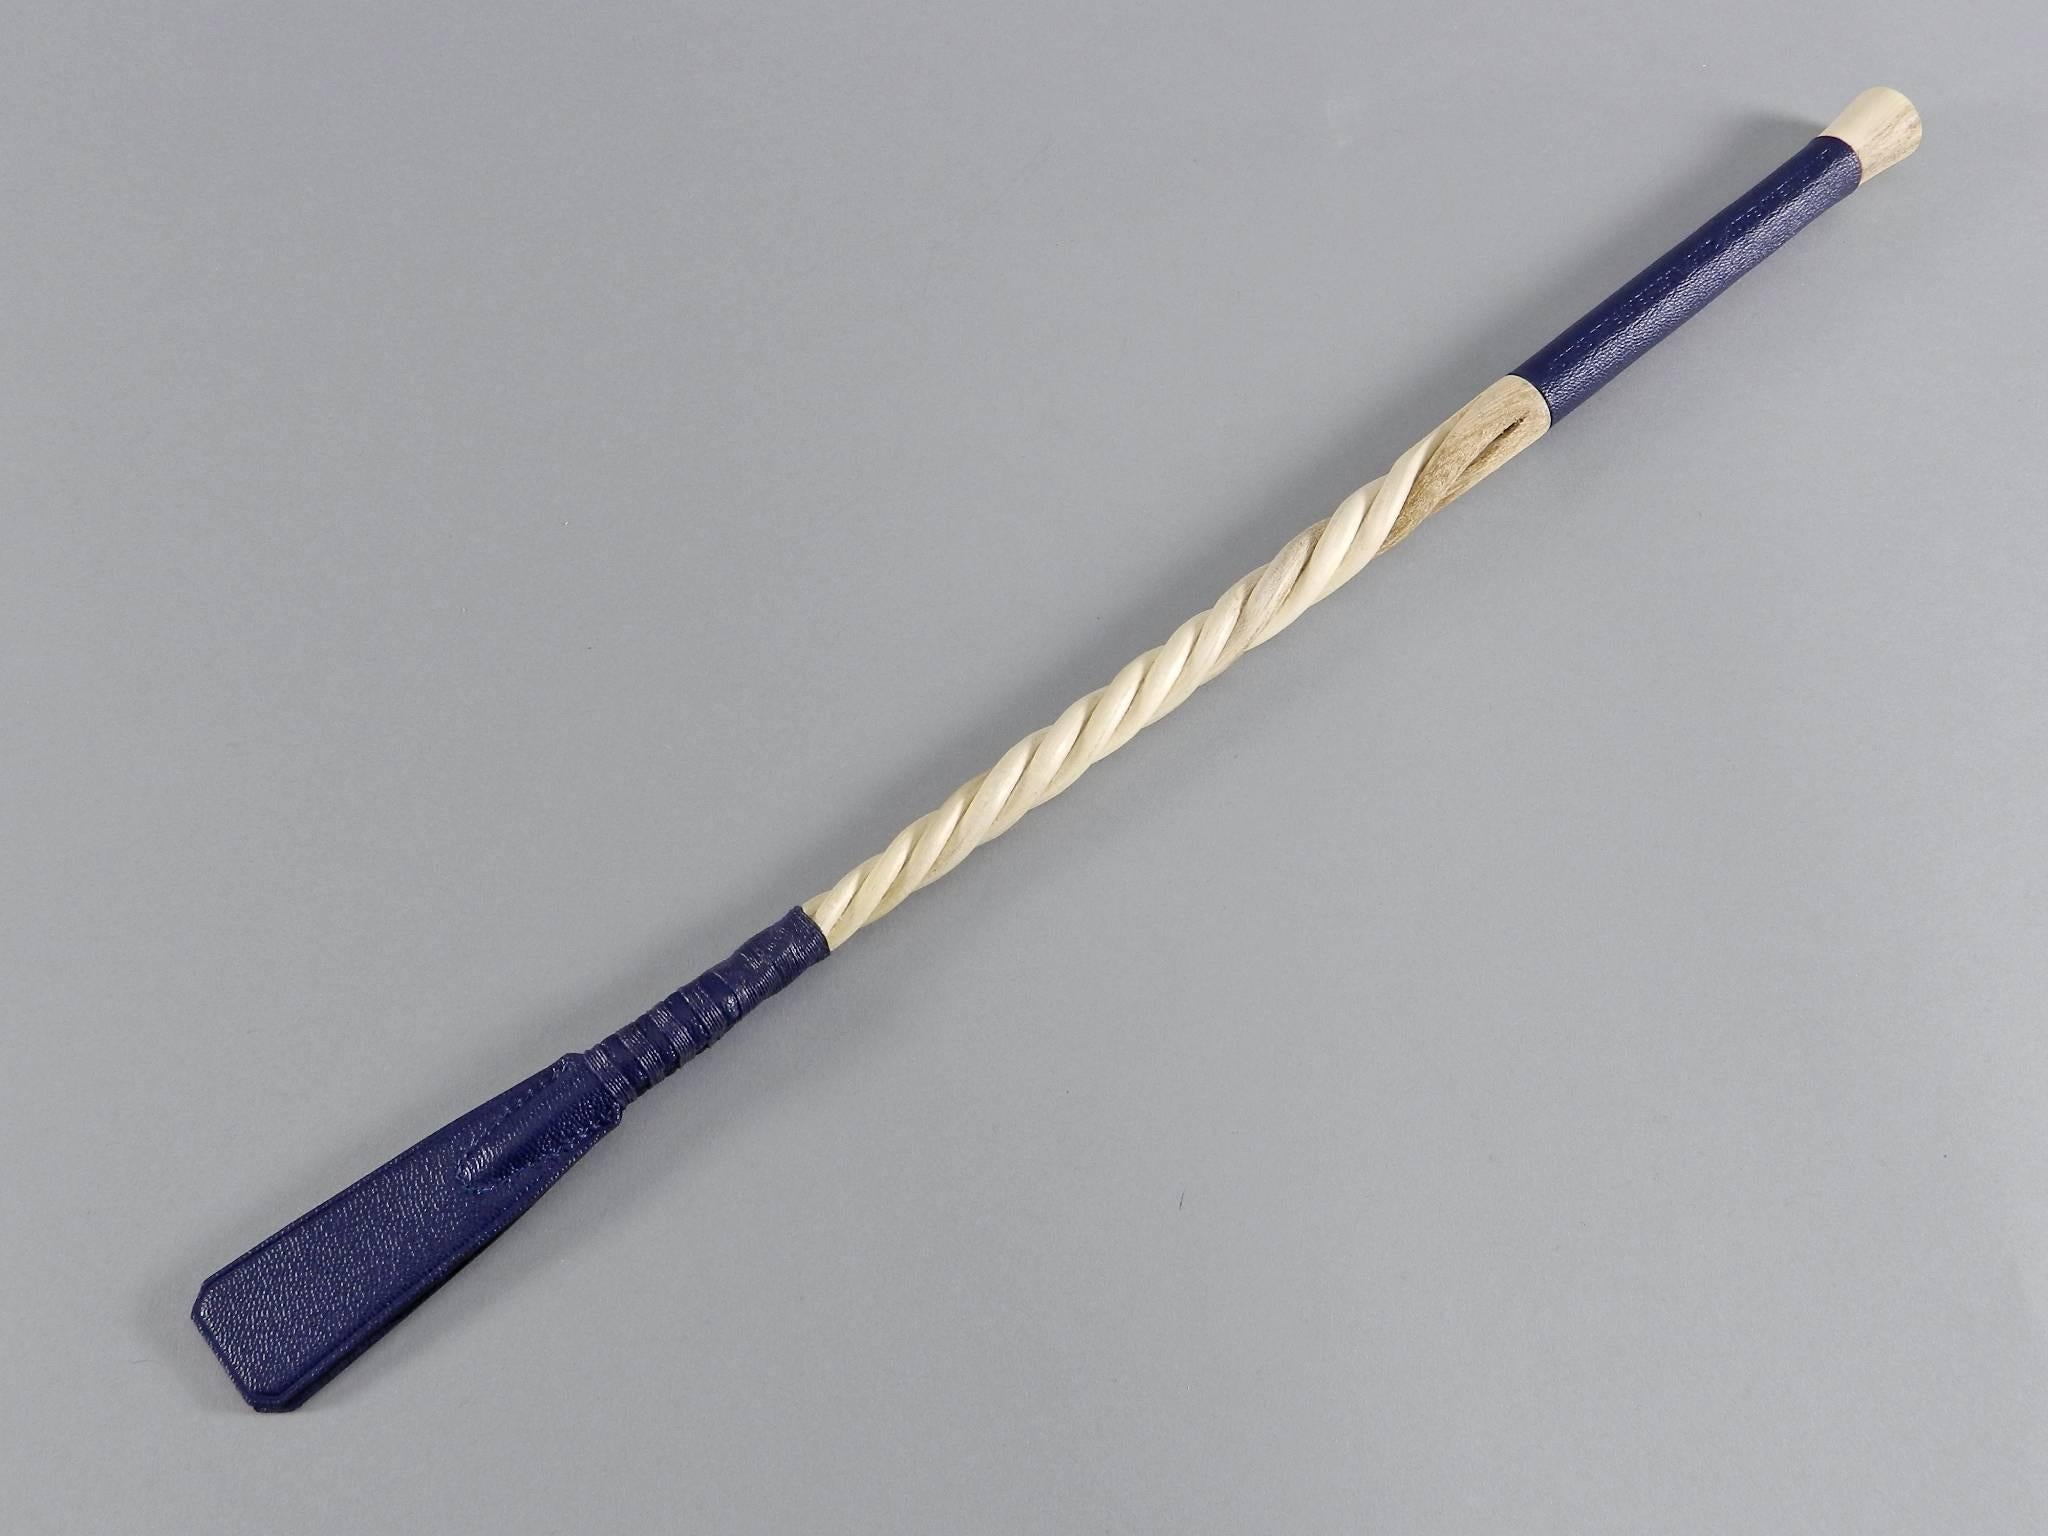 Hermes equestrian riding crop in navy leather. Marked 